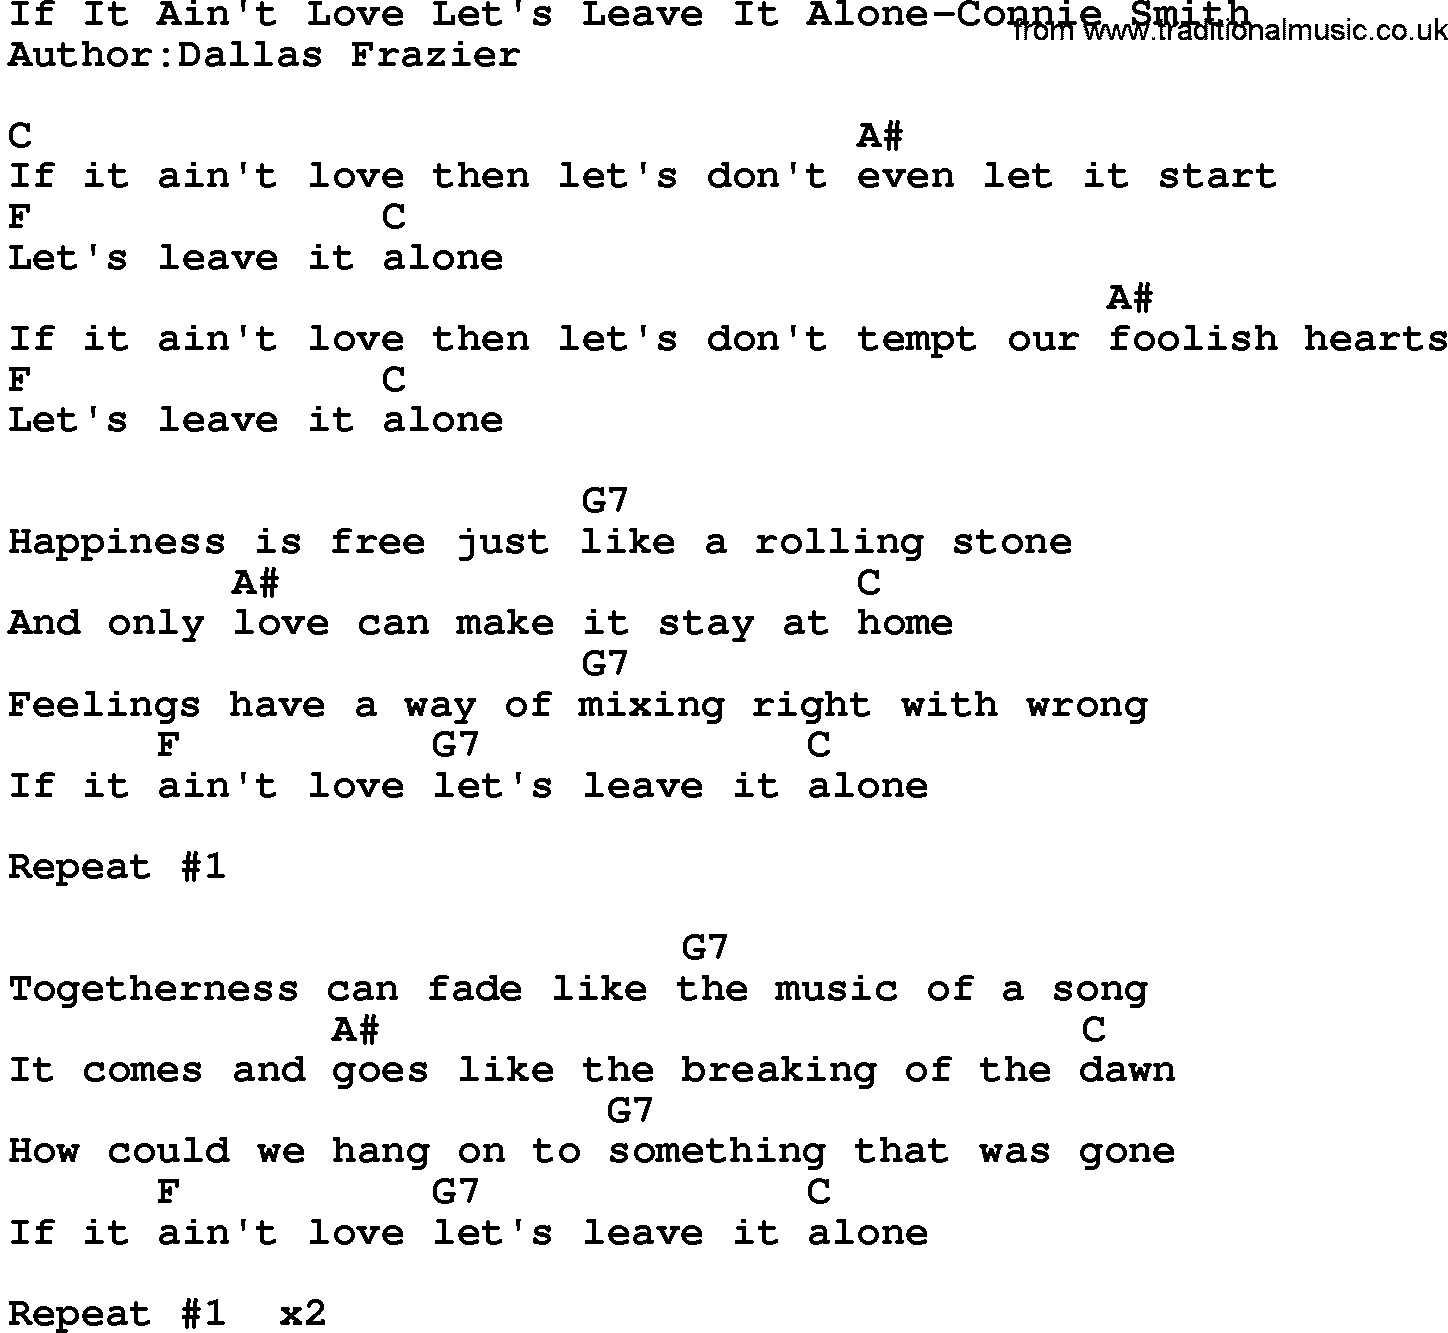 Country music song: If It Ain't Love Let's Leave It Alone-Connie Smith lyrics and chords